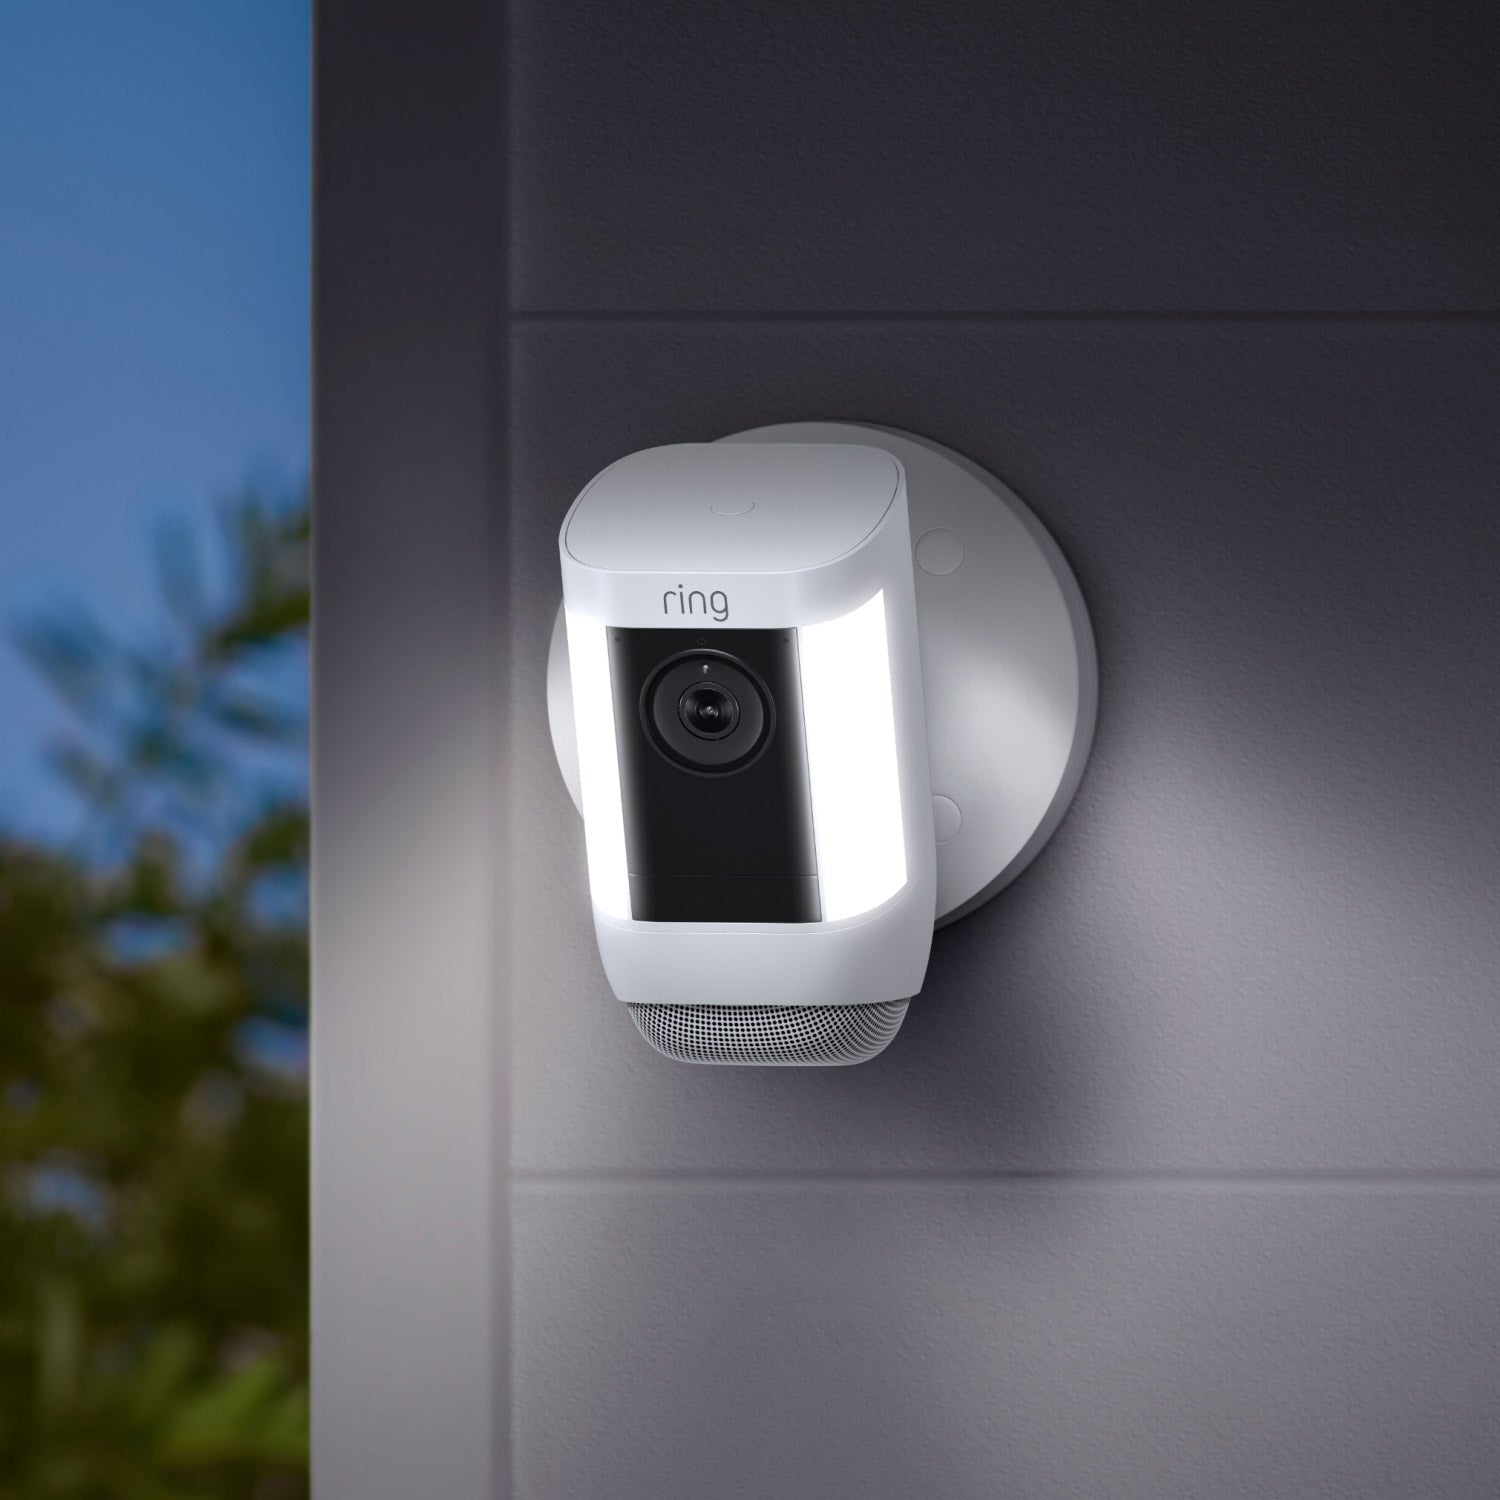 Spotlight Cam Pro (Wired) - Spotlight Cam Pro, Wired model in white, mounted on exterior wall with lights illuminated.